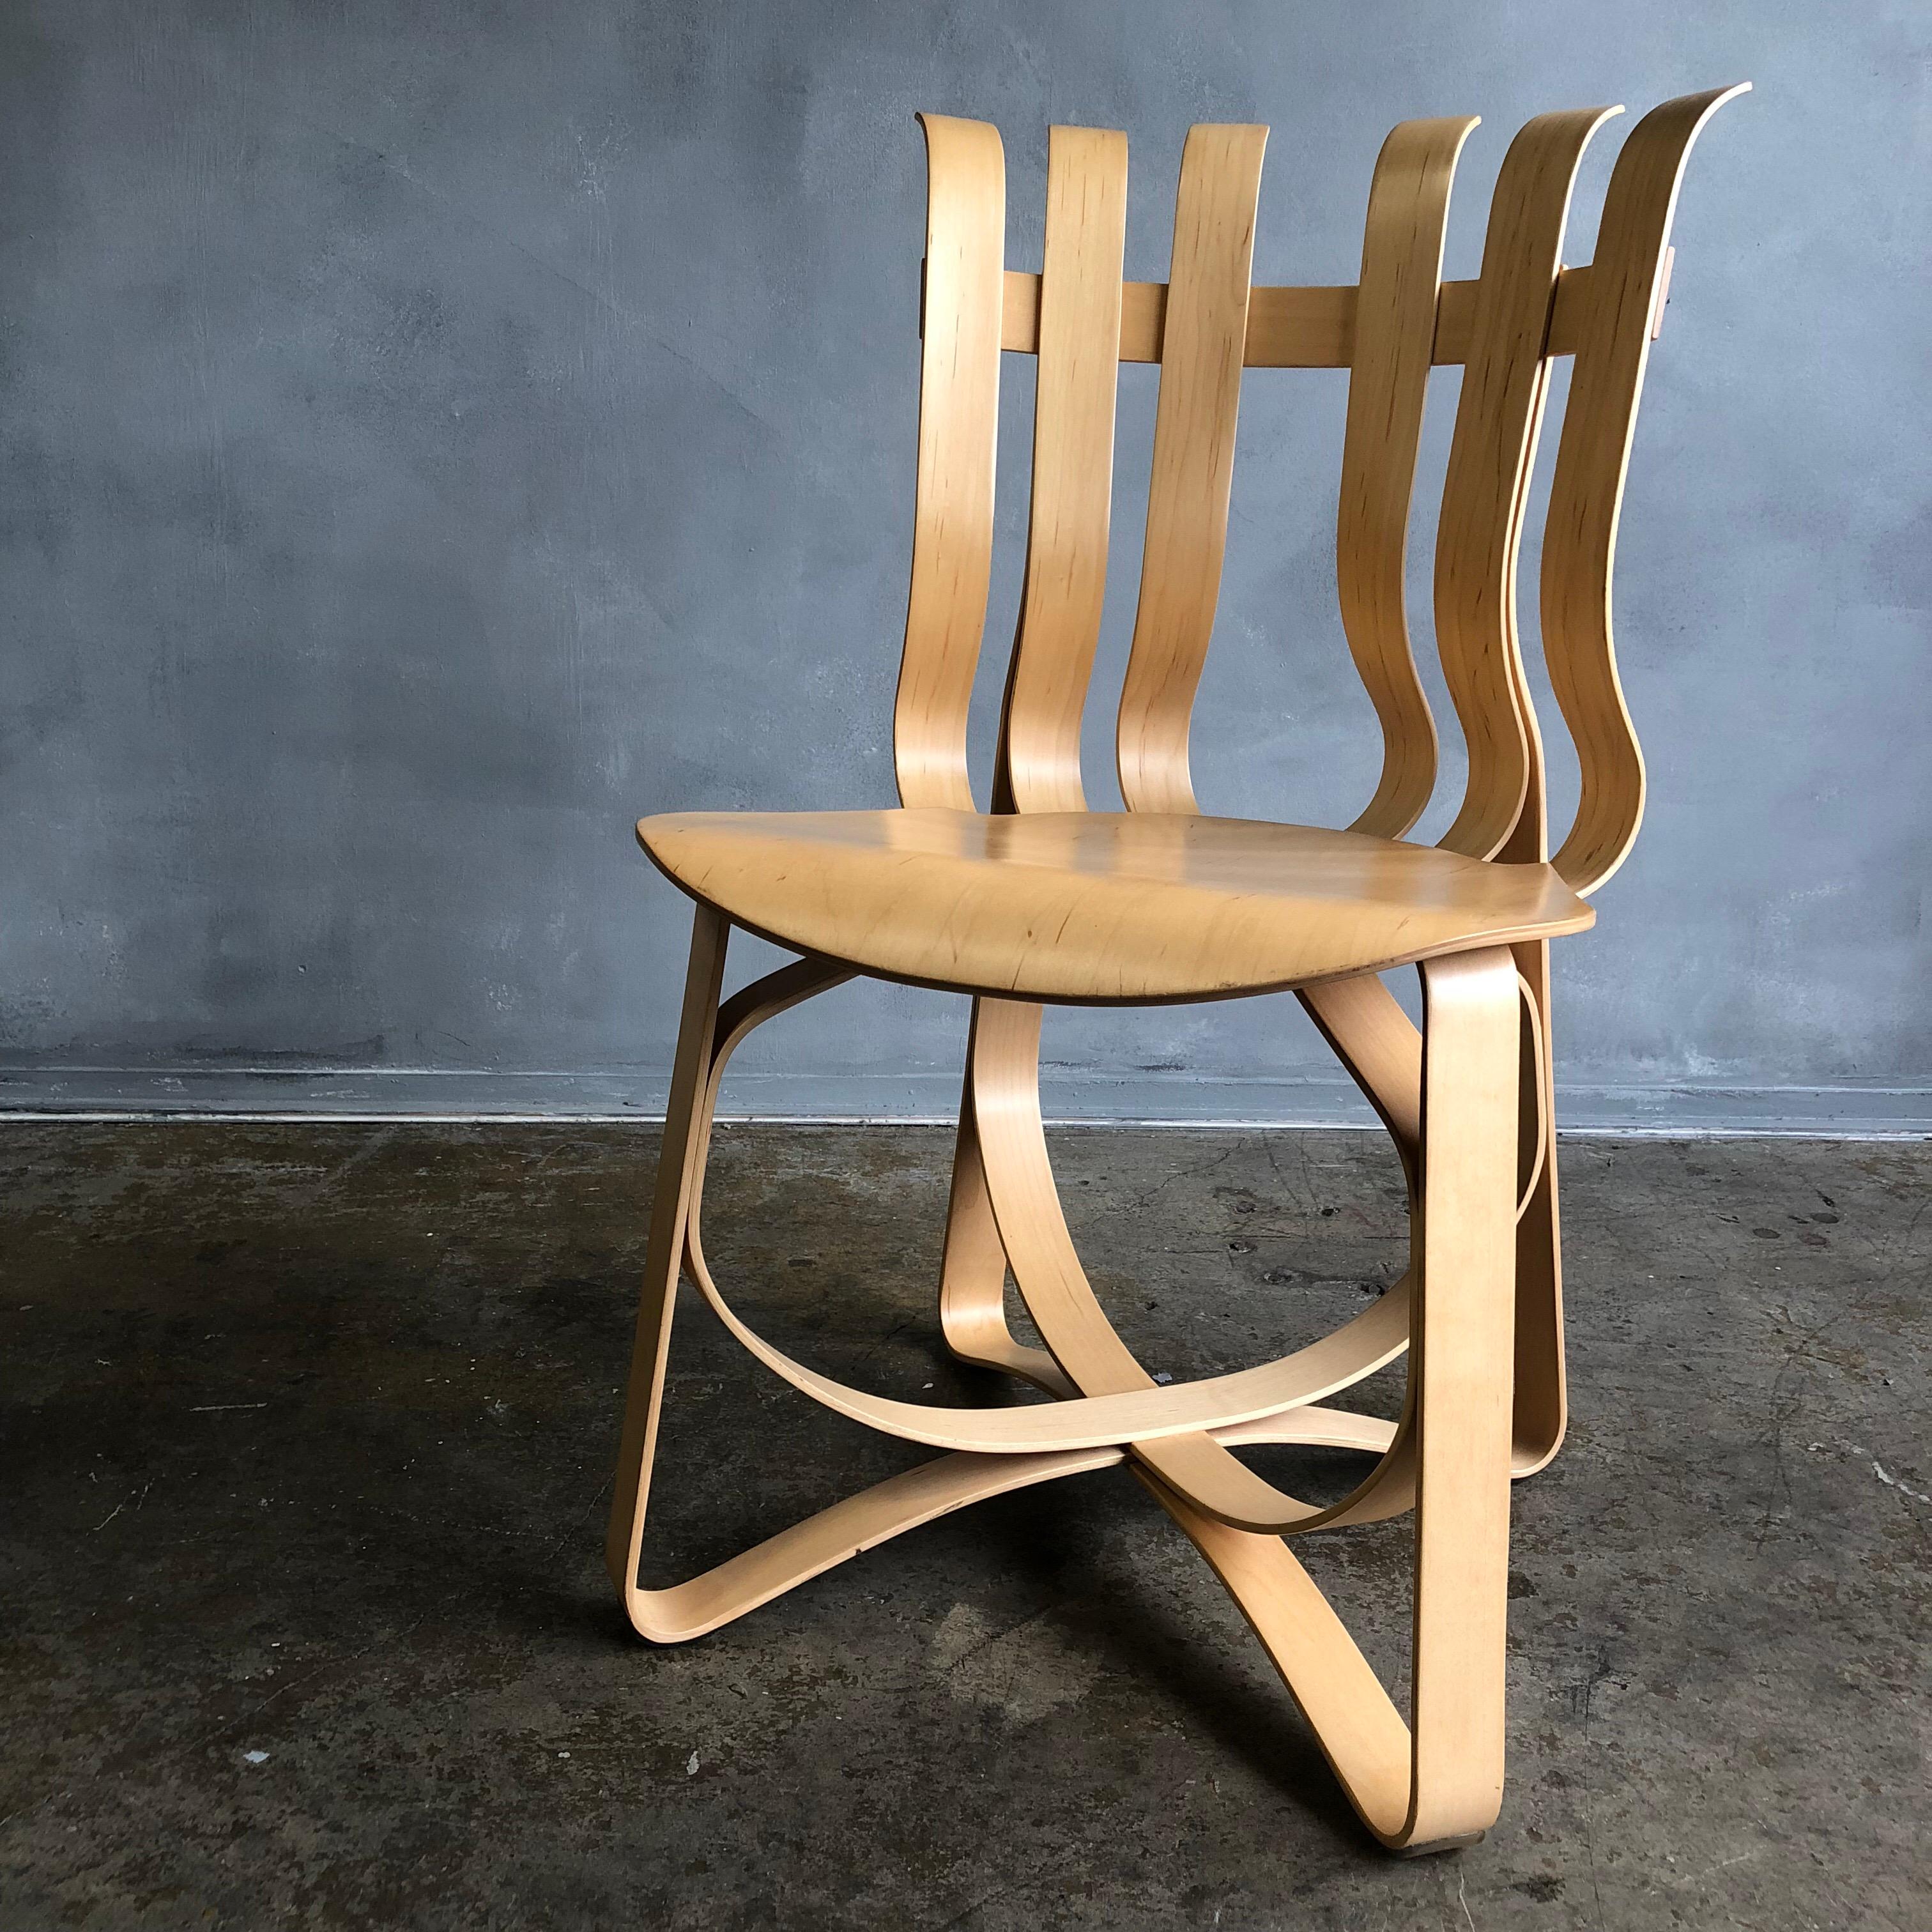 Frank Gehry Hat Trick Chair 2